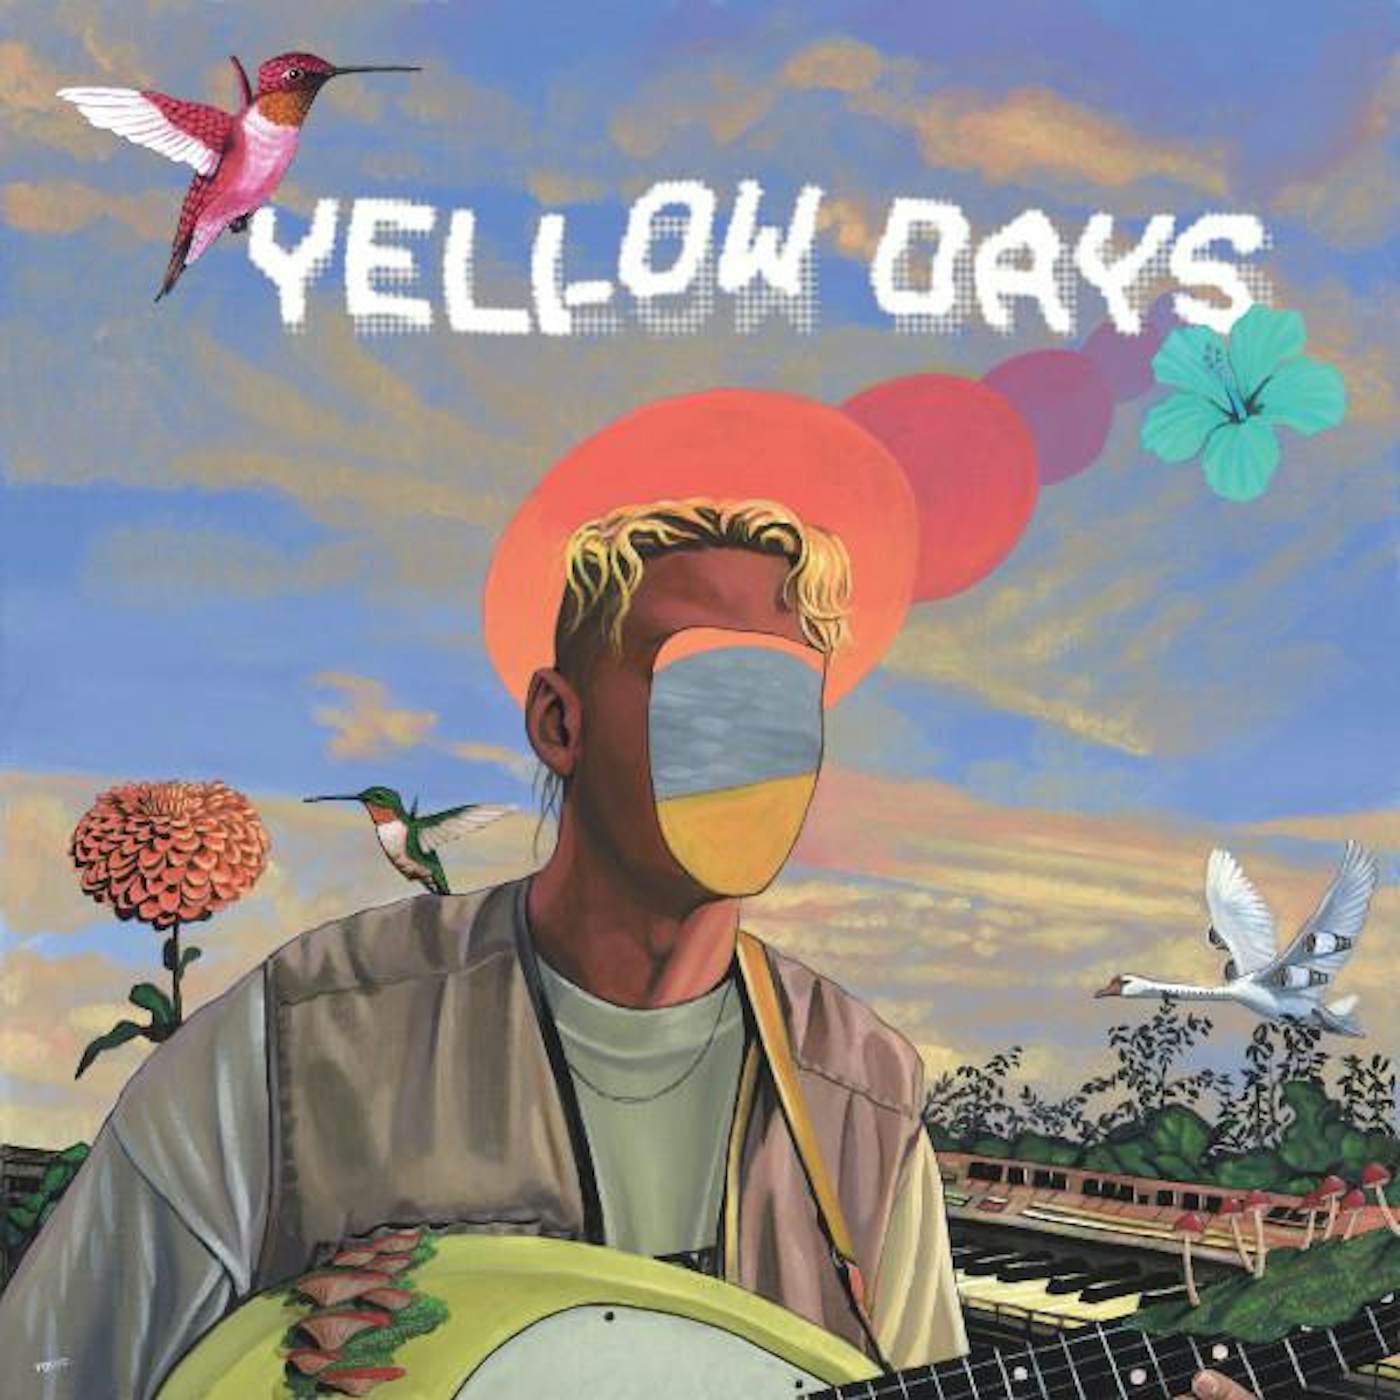 Yellow Days DAY IN A YELLOW BEAT Vinyl Record